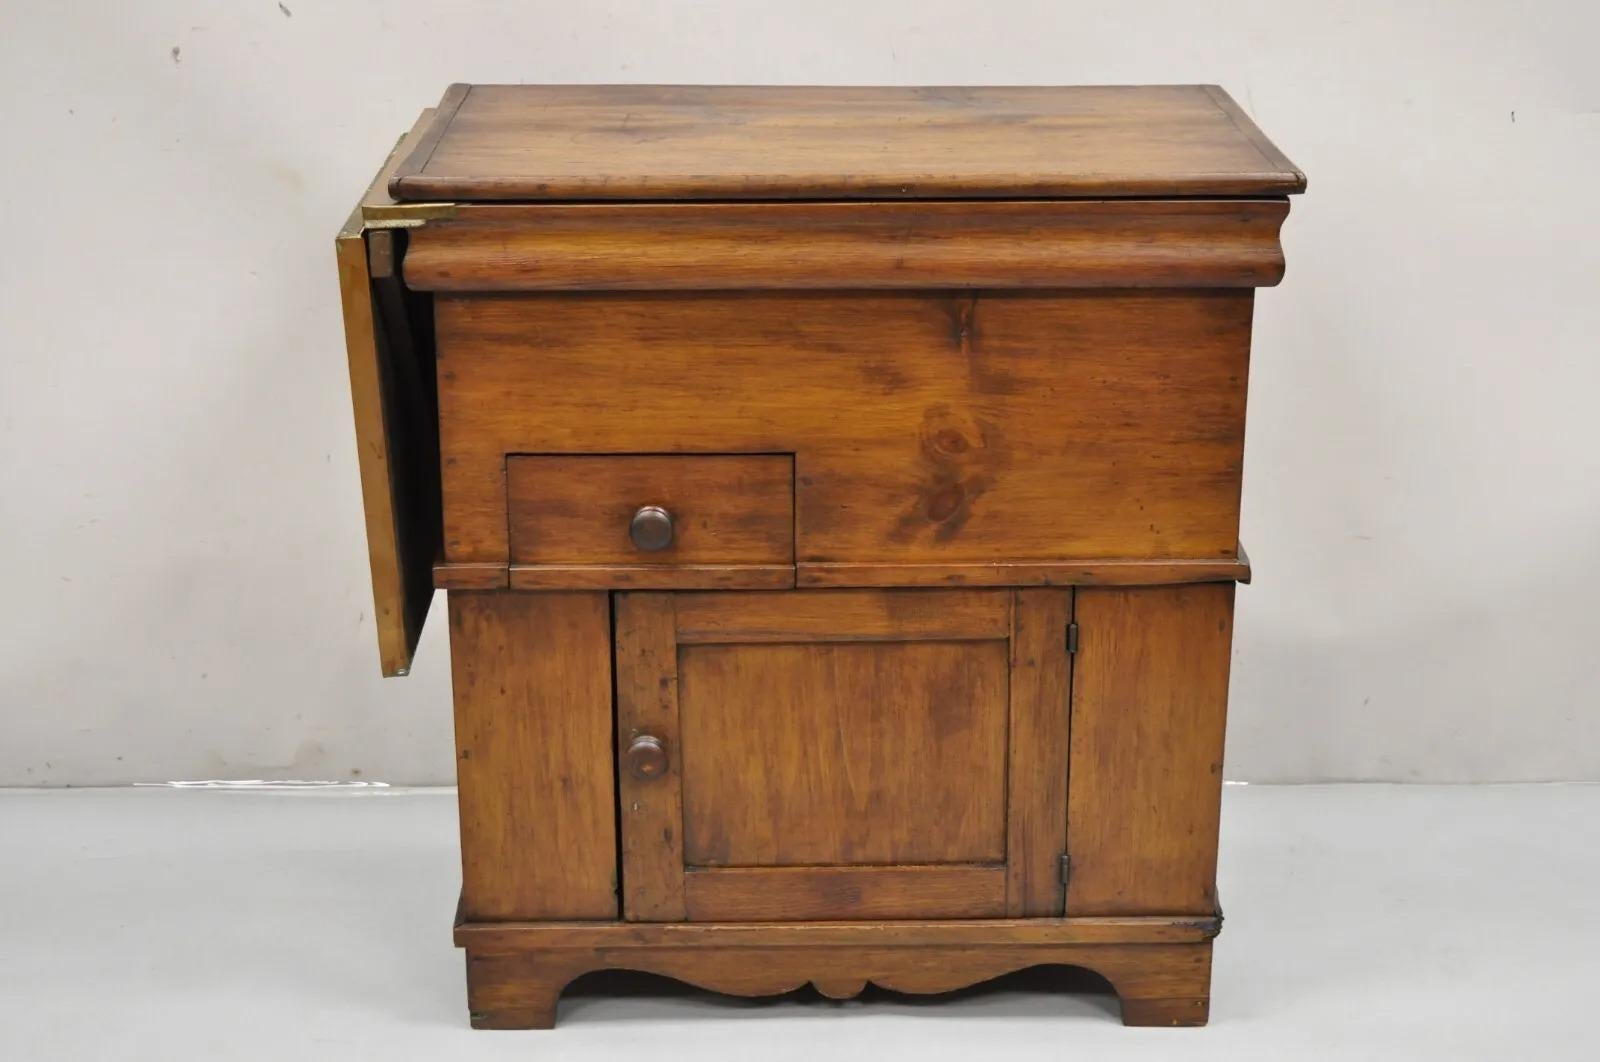 Rare Antique Pine Wood Lift Top Copper Lined Dry Sink with Copper Drop Side Surface. Circa 19th Century. Measurements: 33